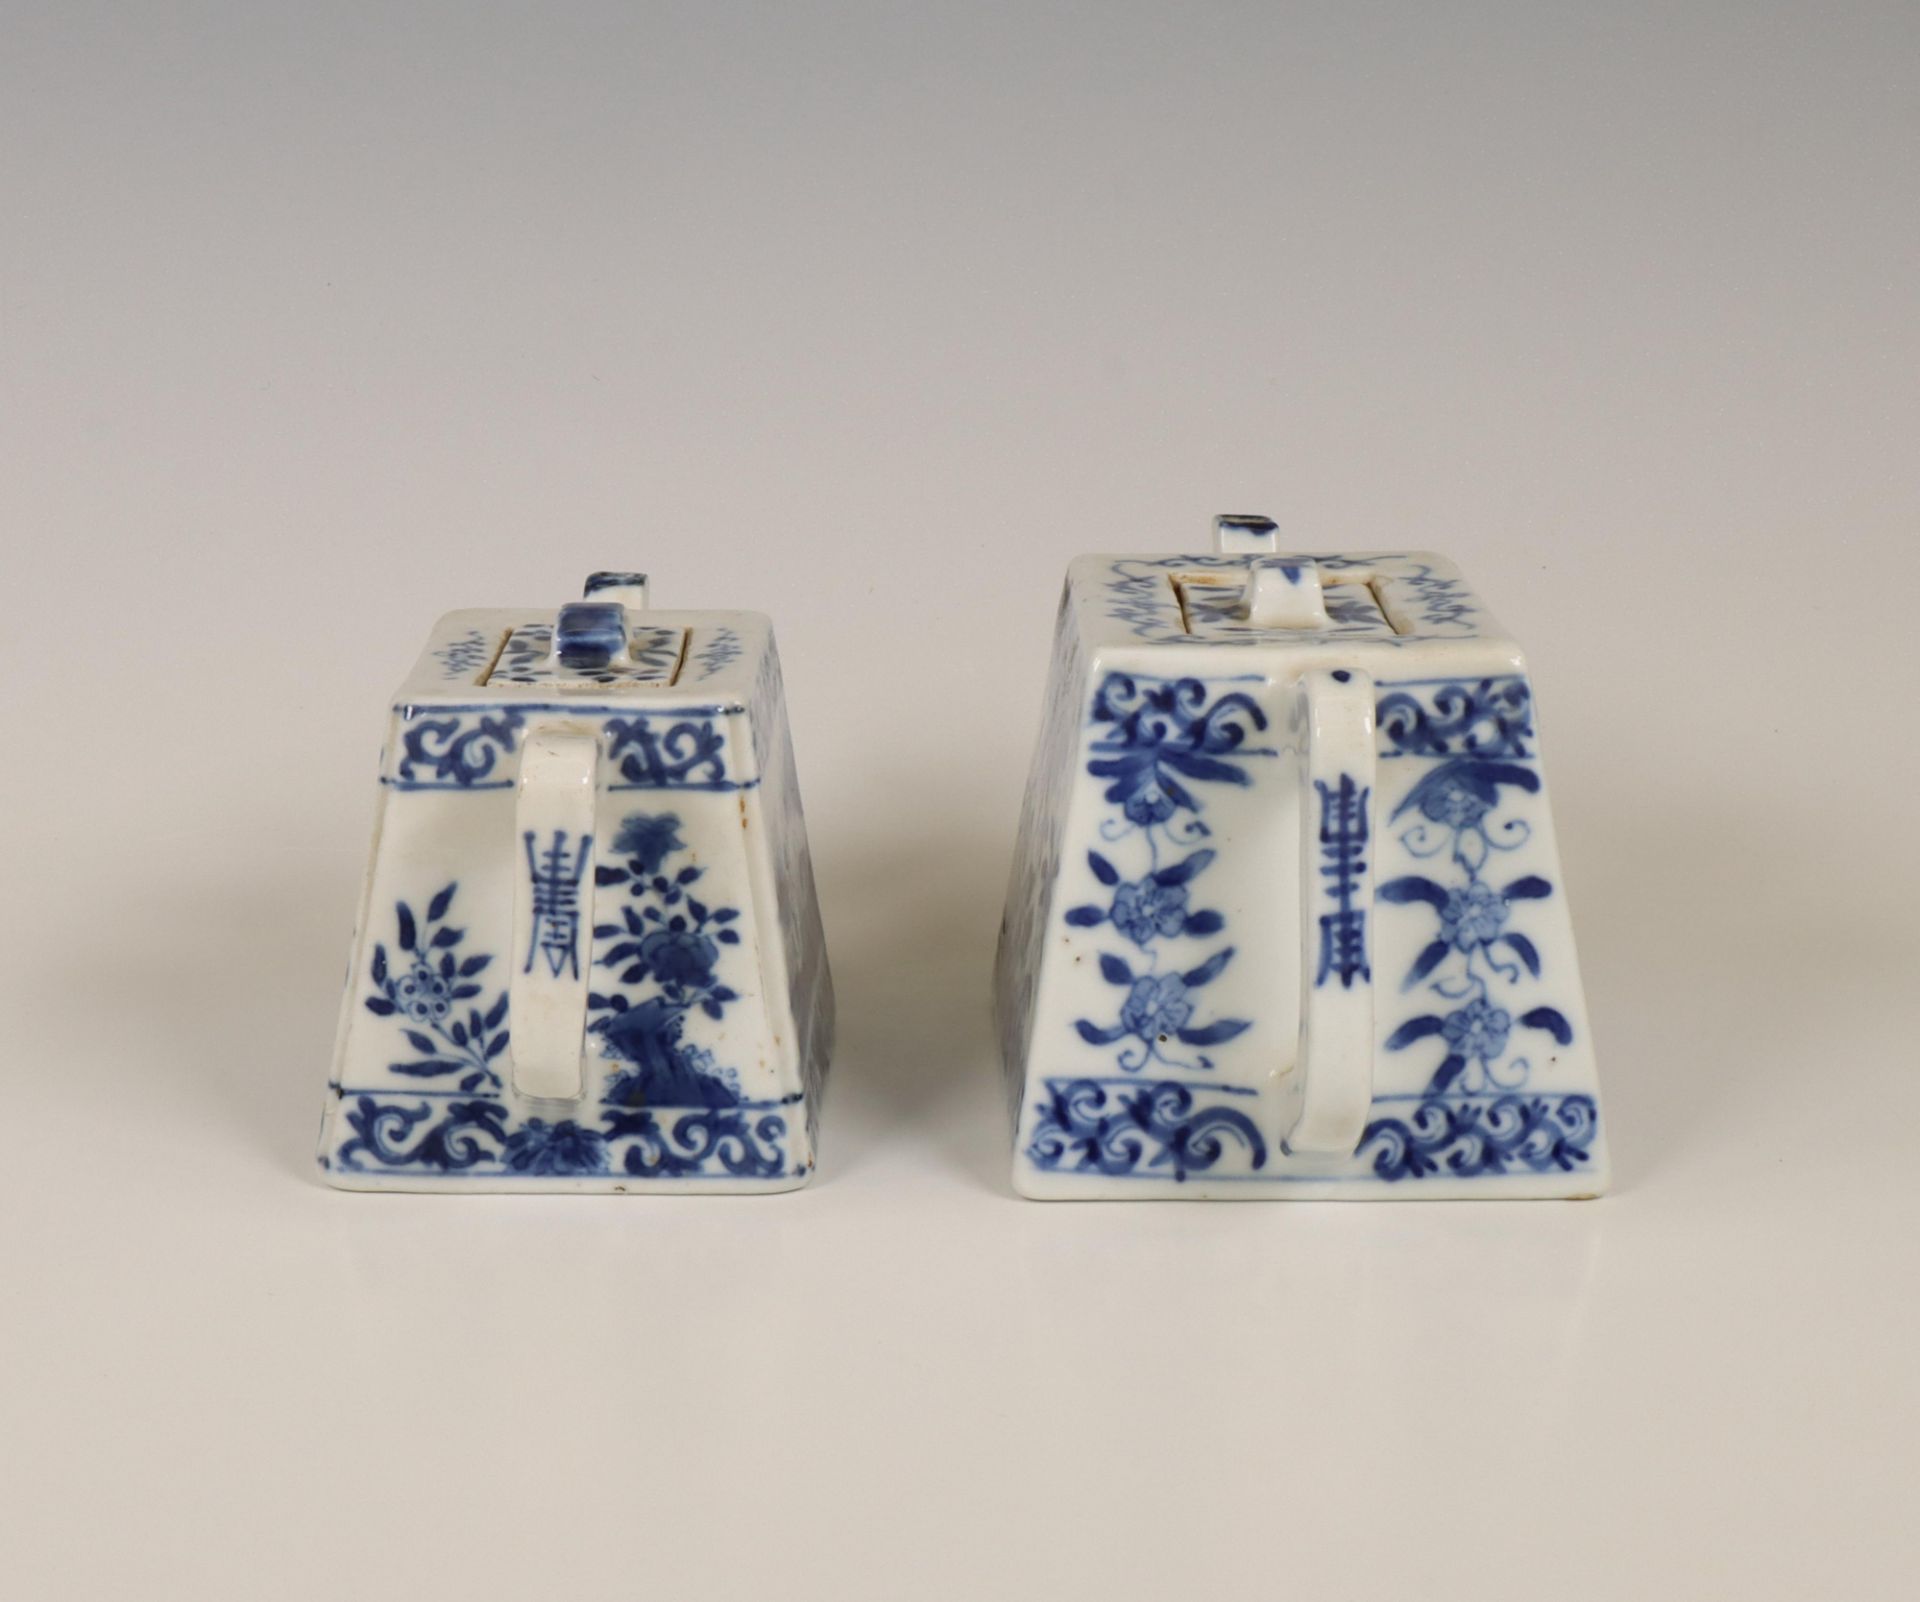 China, two blue and white porcelain rectangular teapots and covers, 18th century, - Image 5 of 5